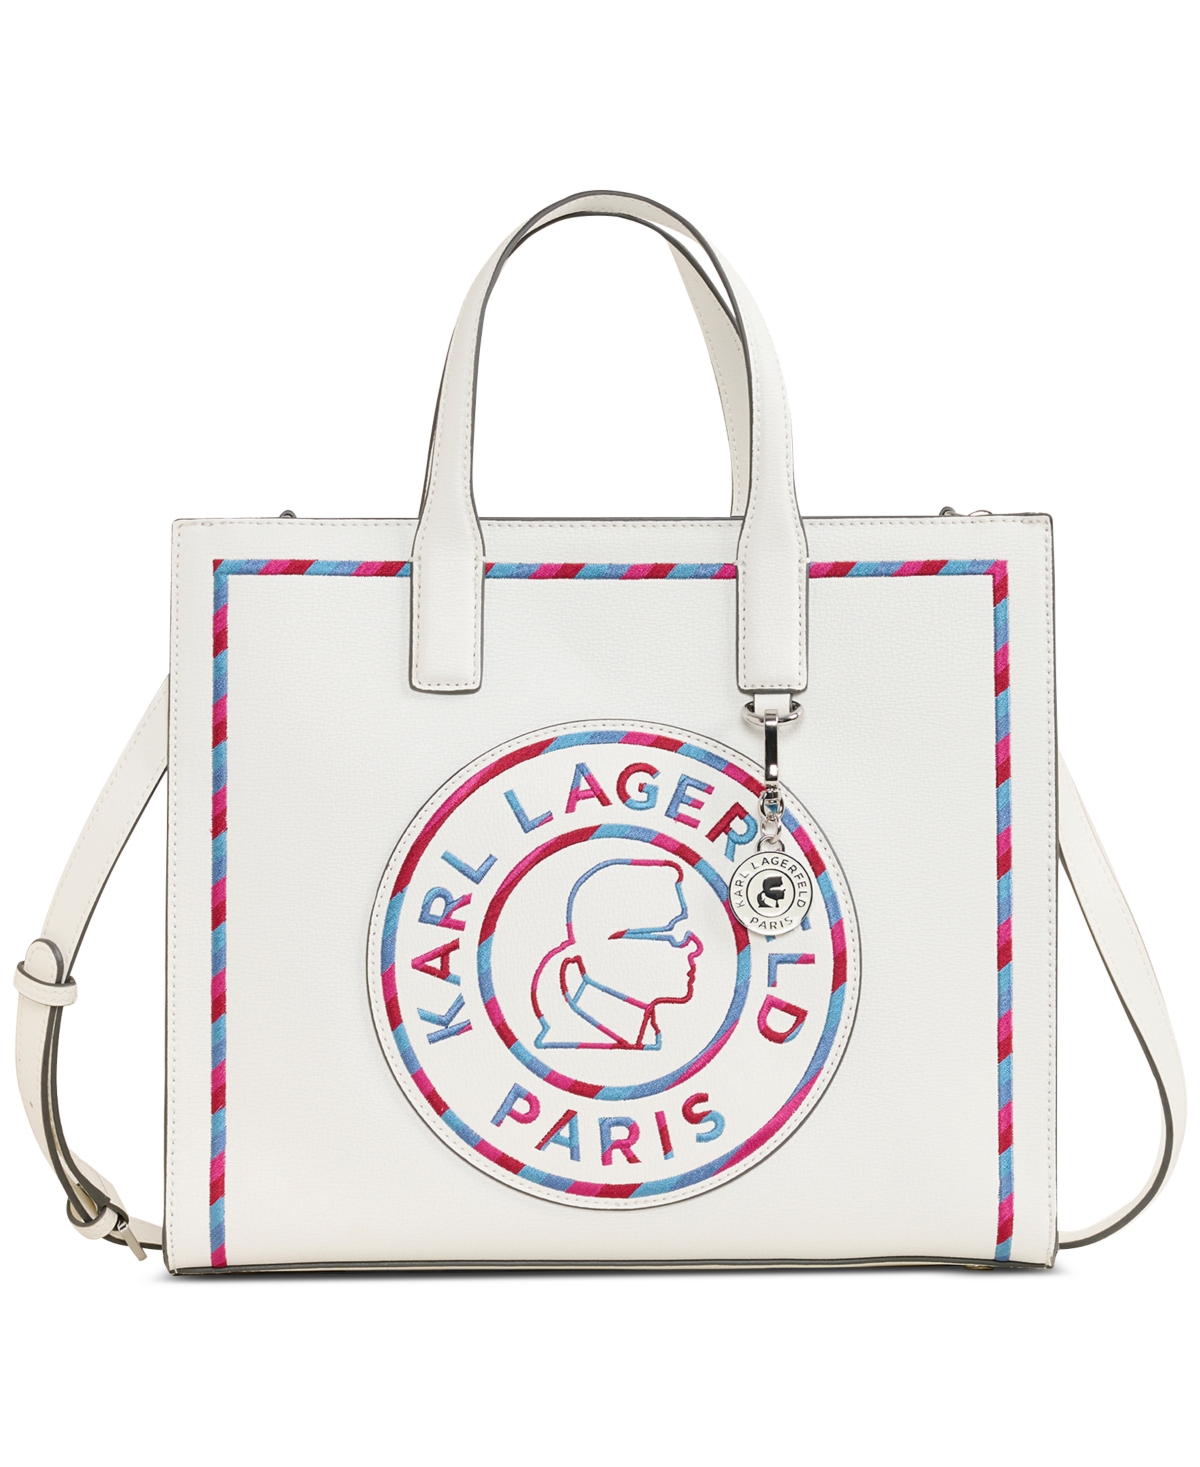 Karl Lagerfeld Nouveau Medium Leather Tote In White,multi